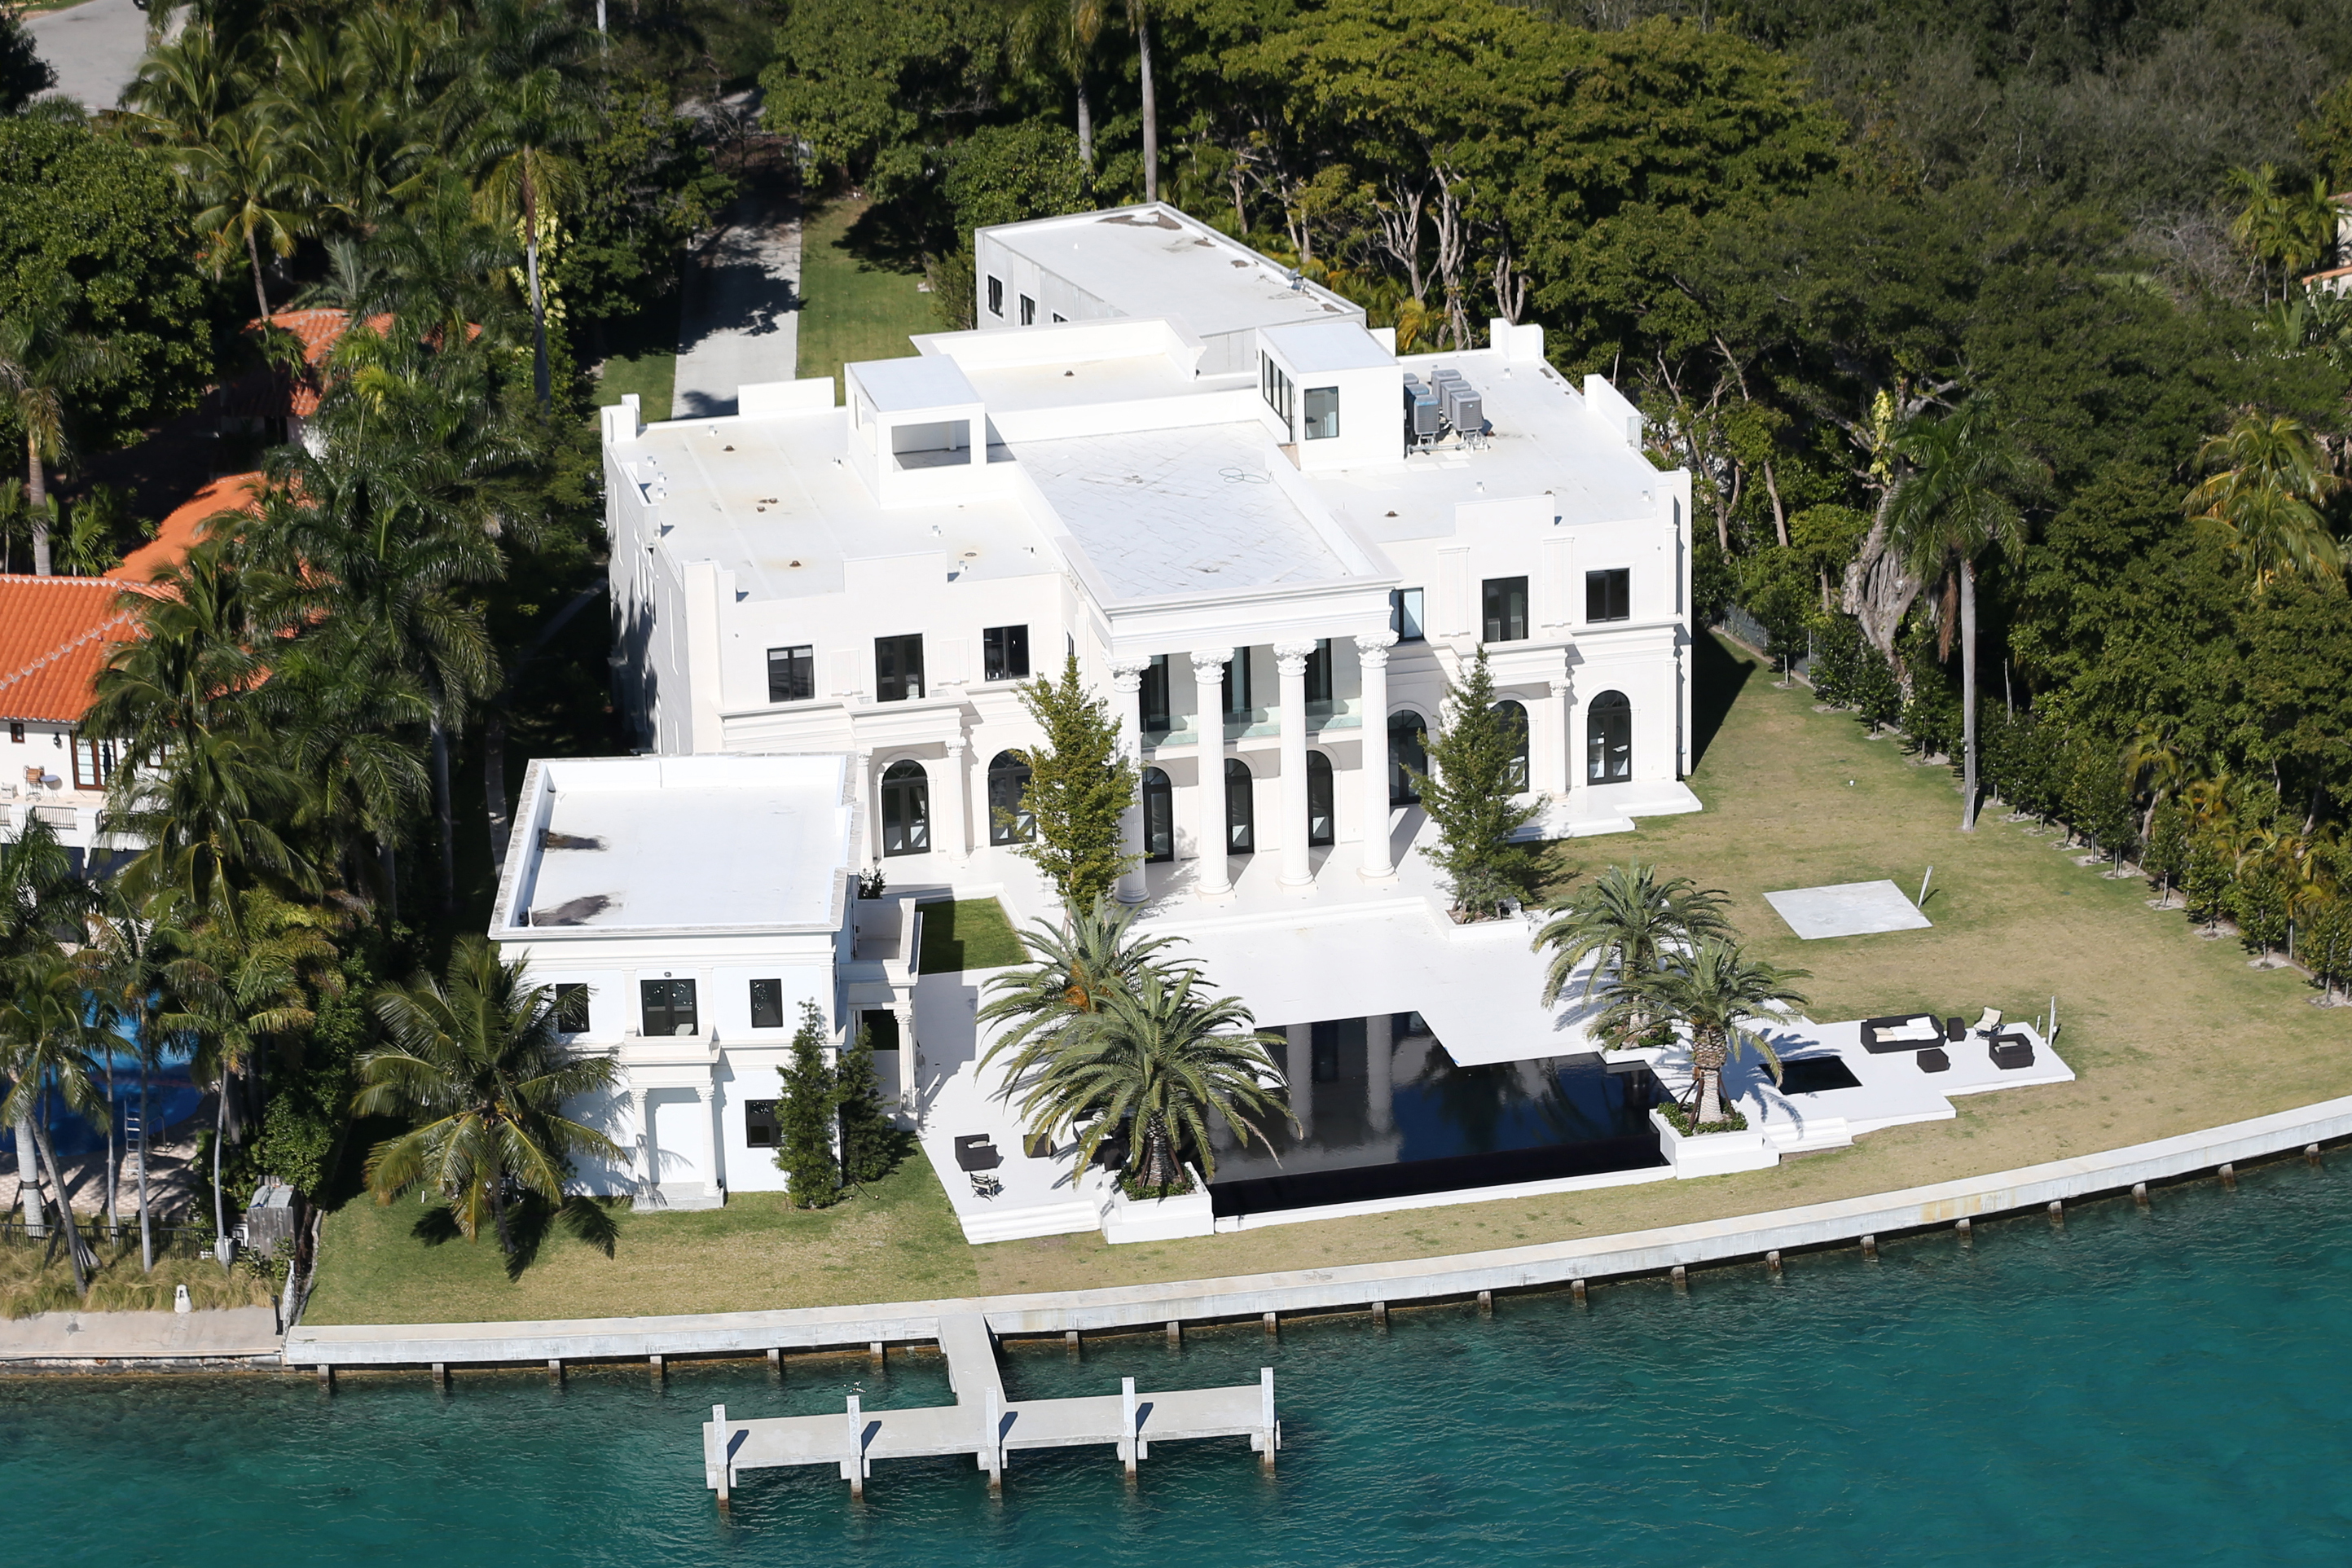 This Is the Insanely Large Home 23% of Rich Millennials Say They Want